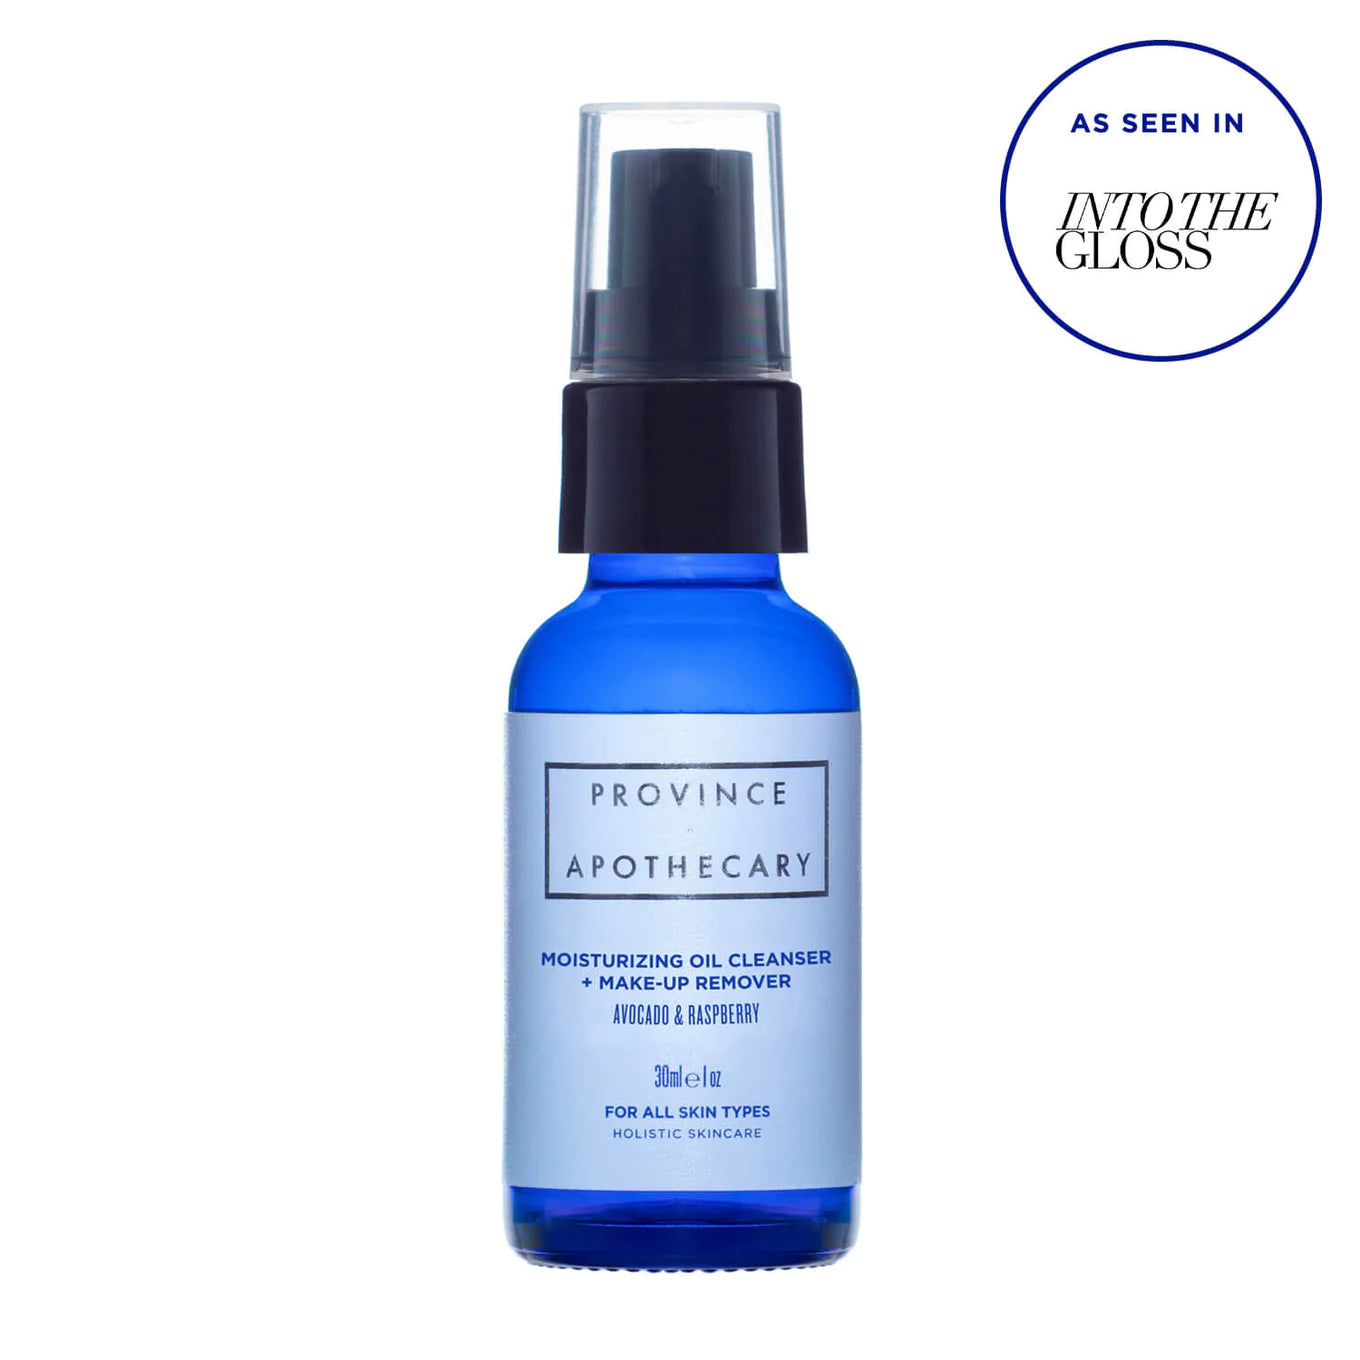 Province Apothecary Moisturizing Oil Cleanser + Make Up Remover